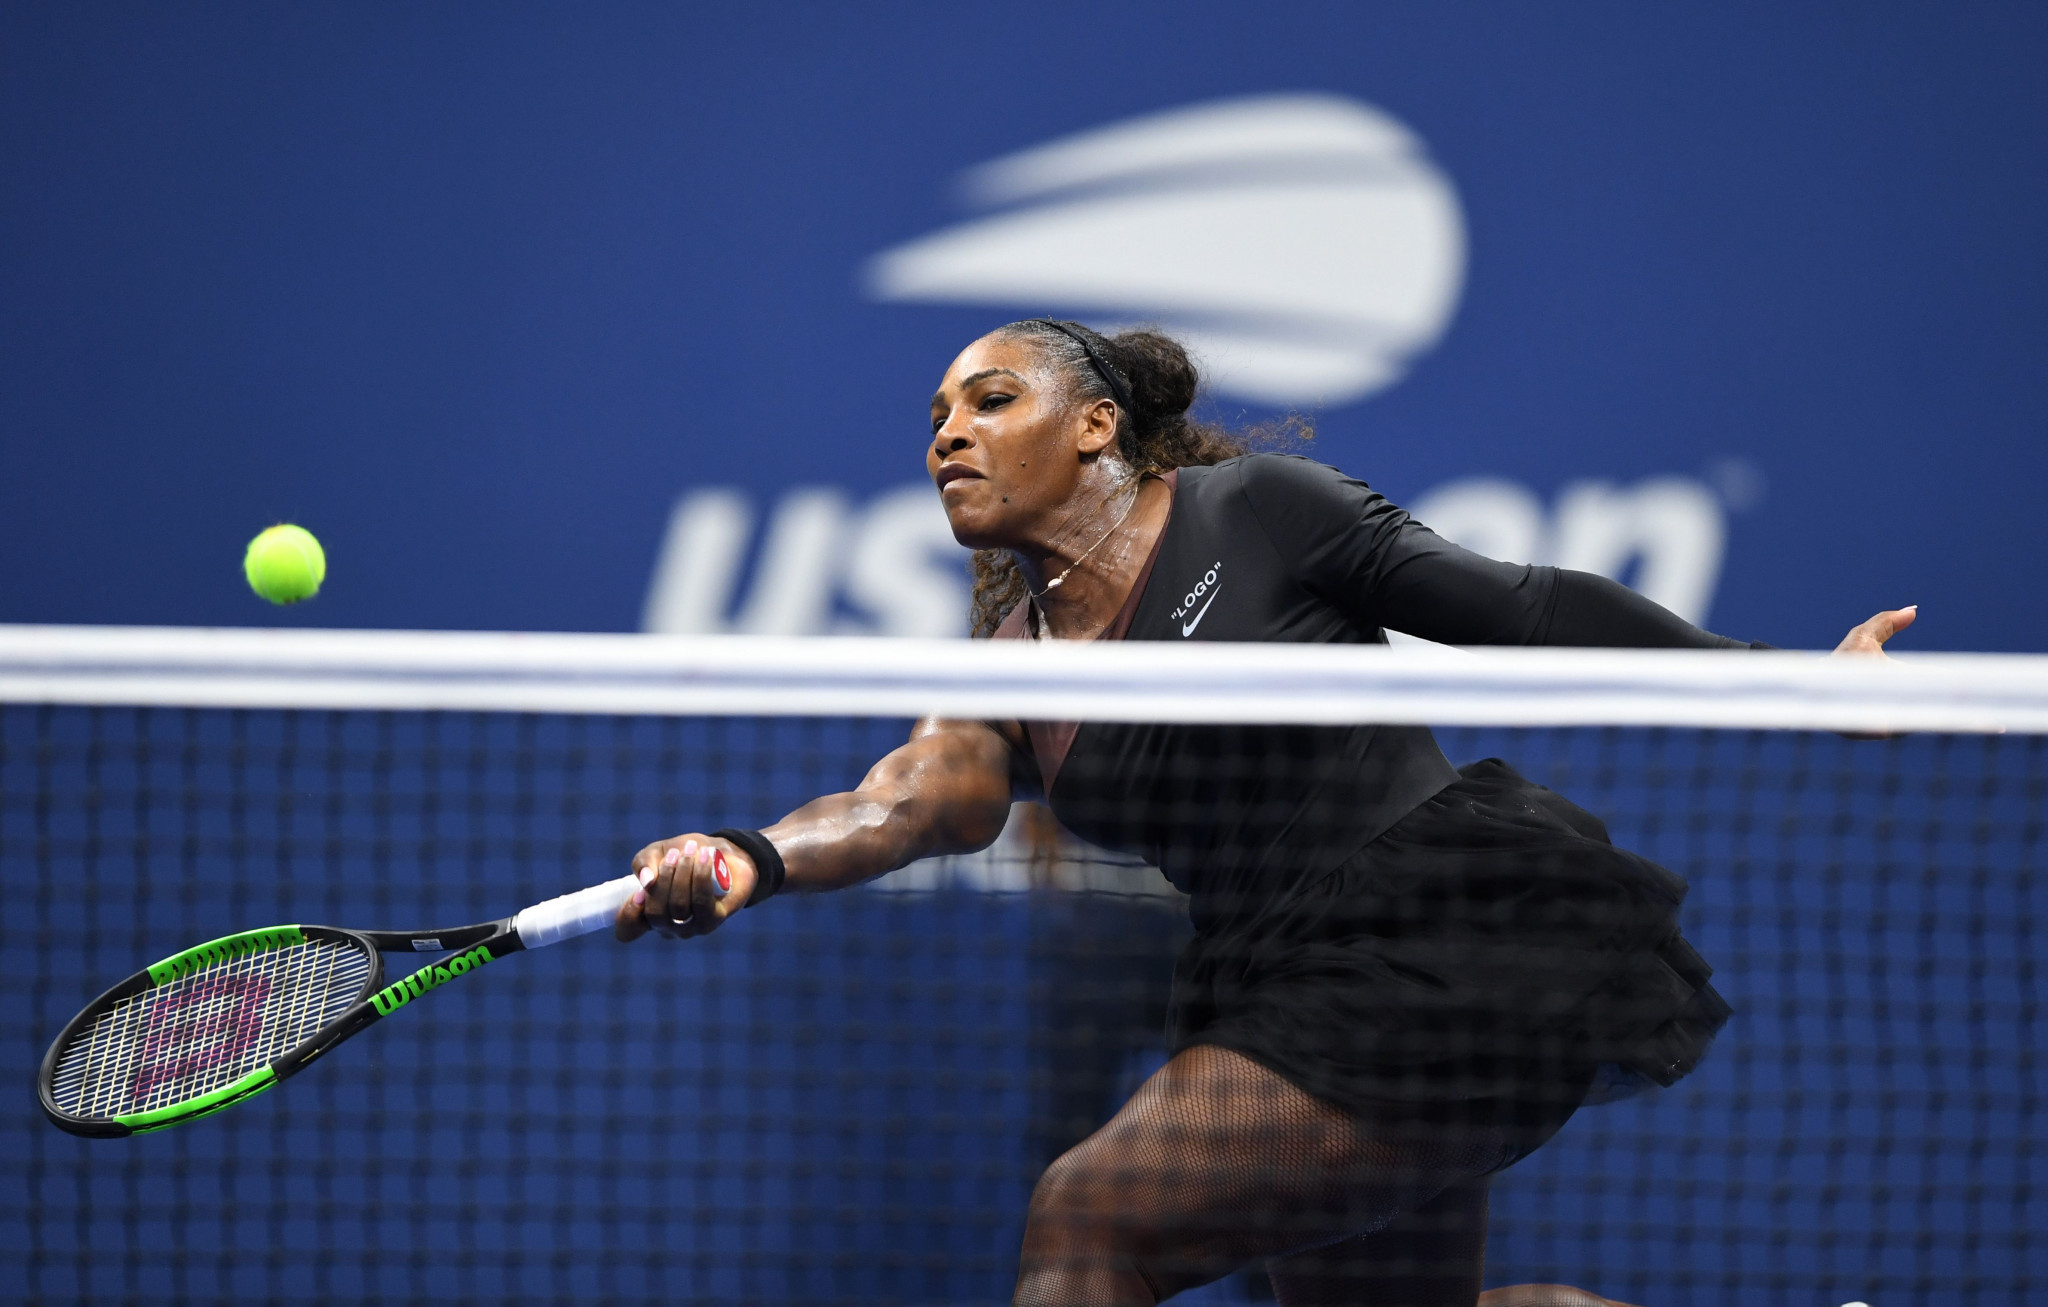 Serena Williams reached her ninth consecutive US Open semi-final to continue her pursuit of a 24th Grand Slam crown ©Getty Images